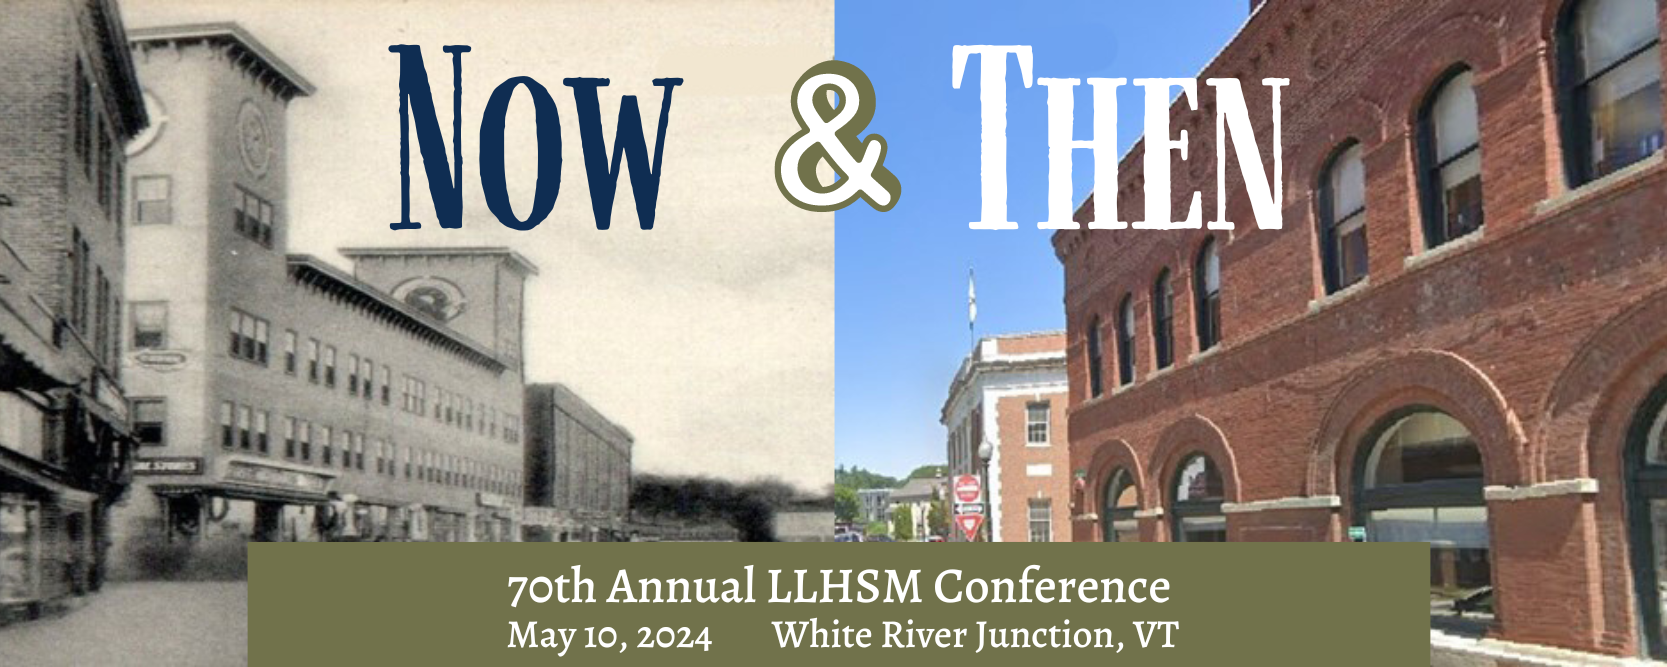 Now & Then 70th Annual LLHSM Conference, May 10, 2024